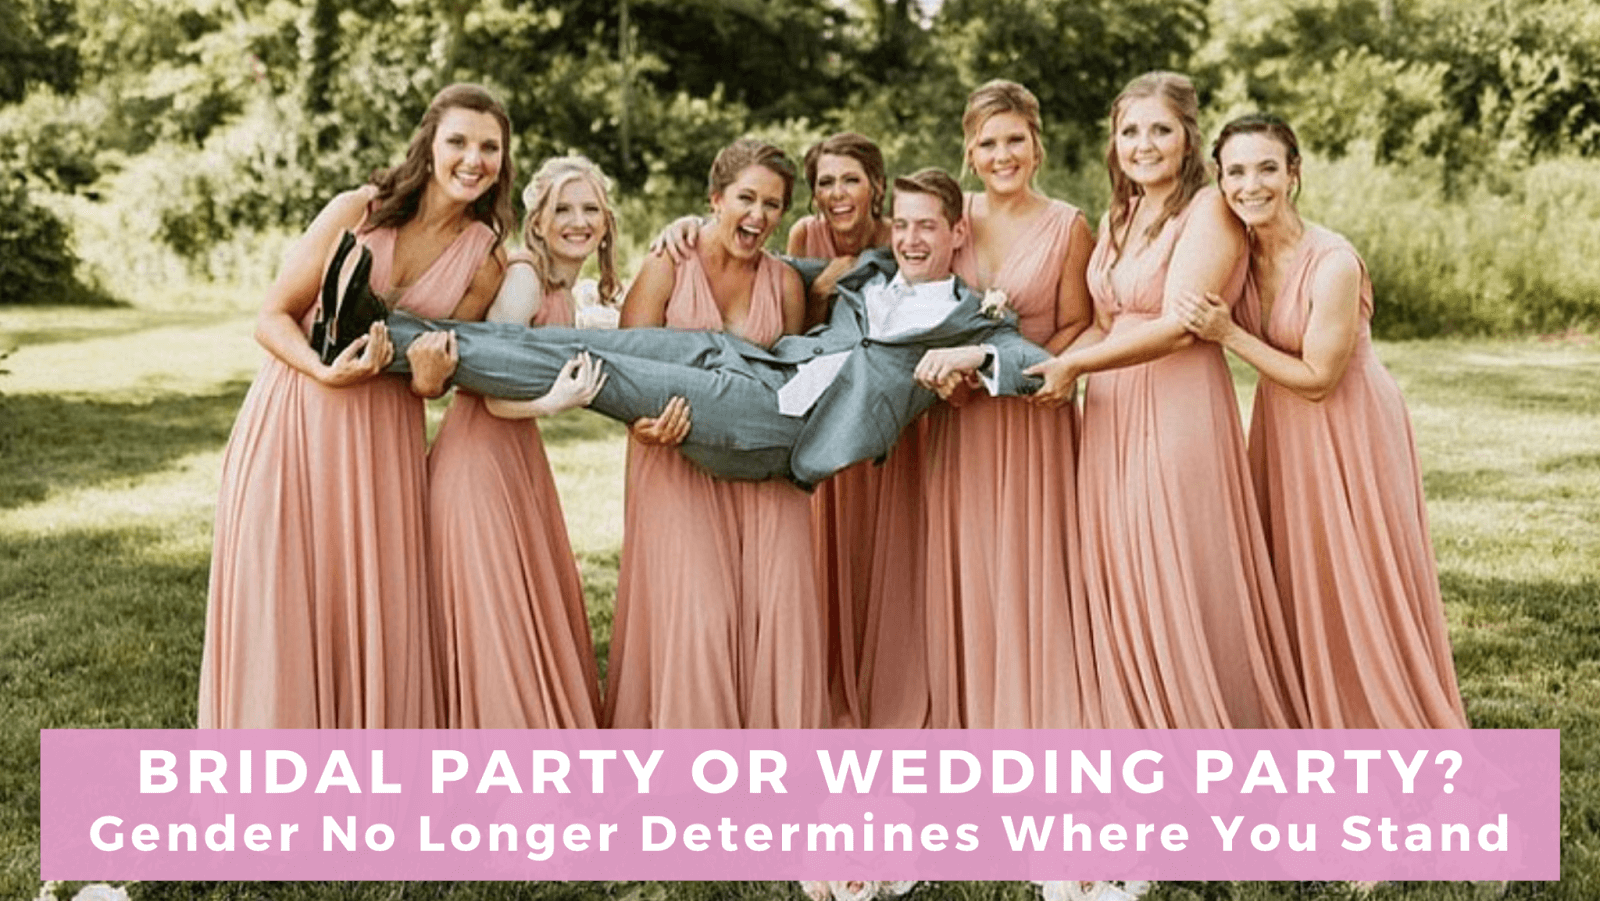 The Best Bachelor Party Outfits for The Groom & The Group